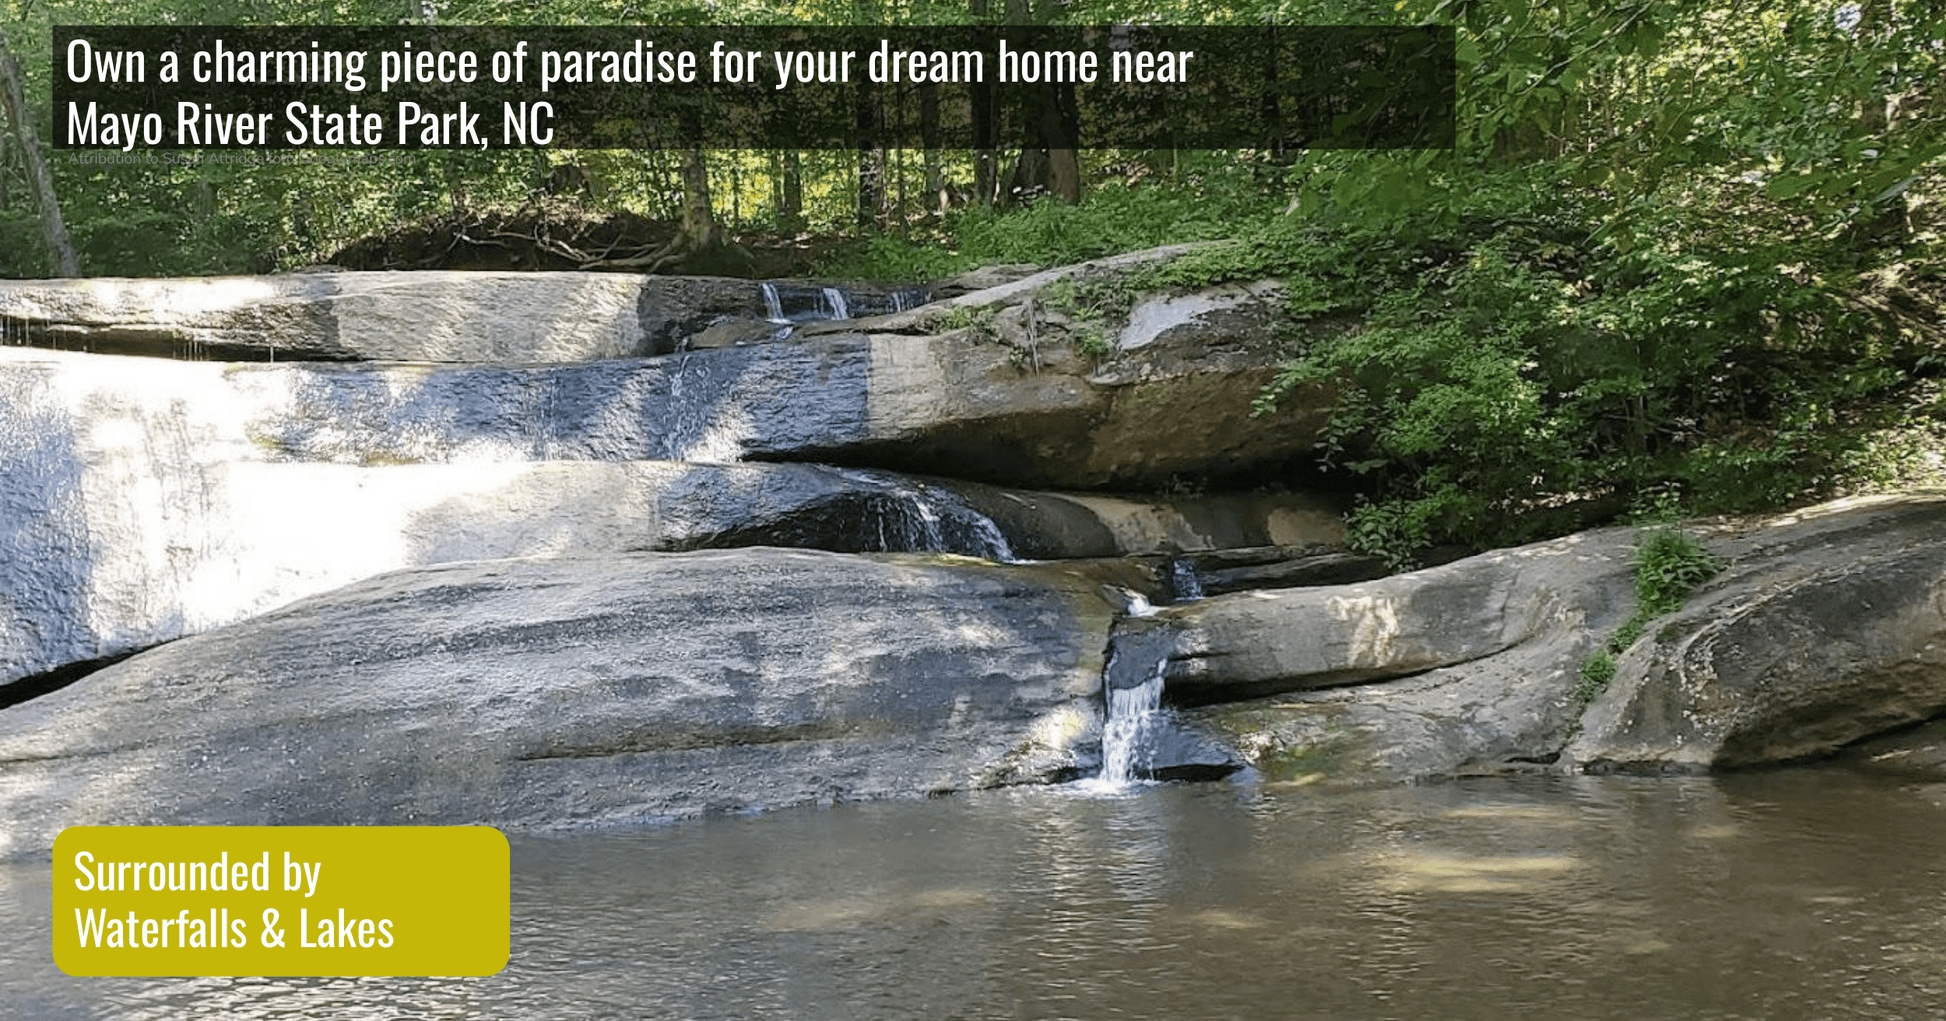 Your Dream Home Near Mayo River State Park, NC